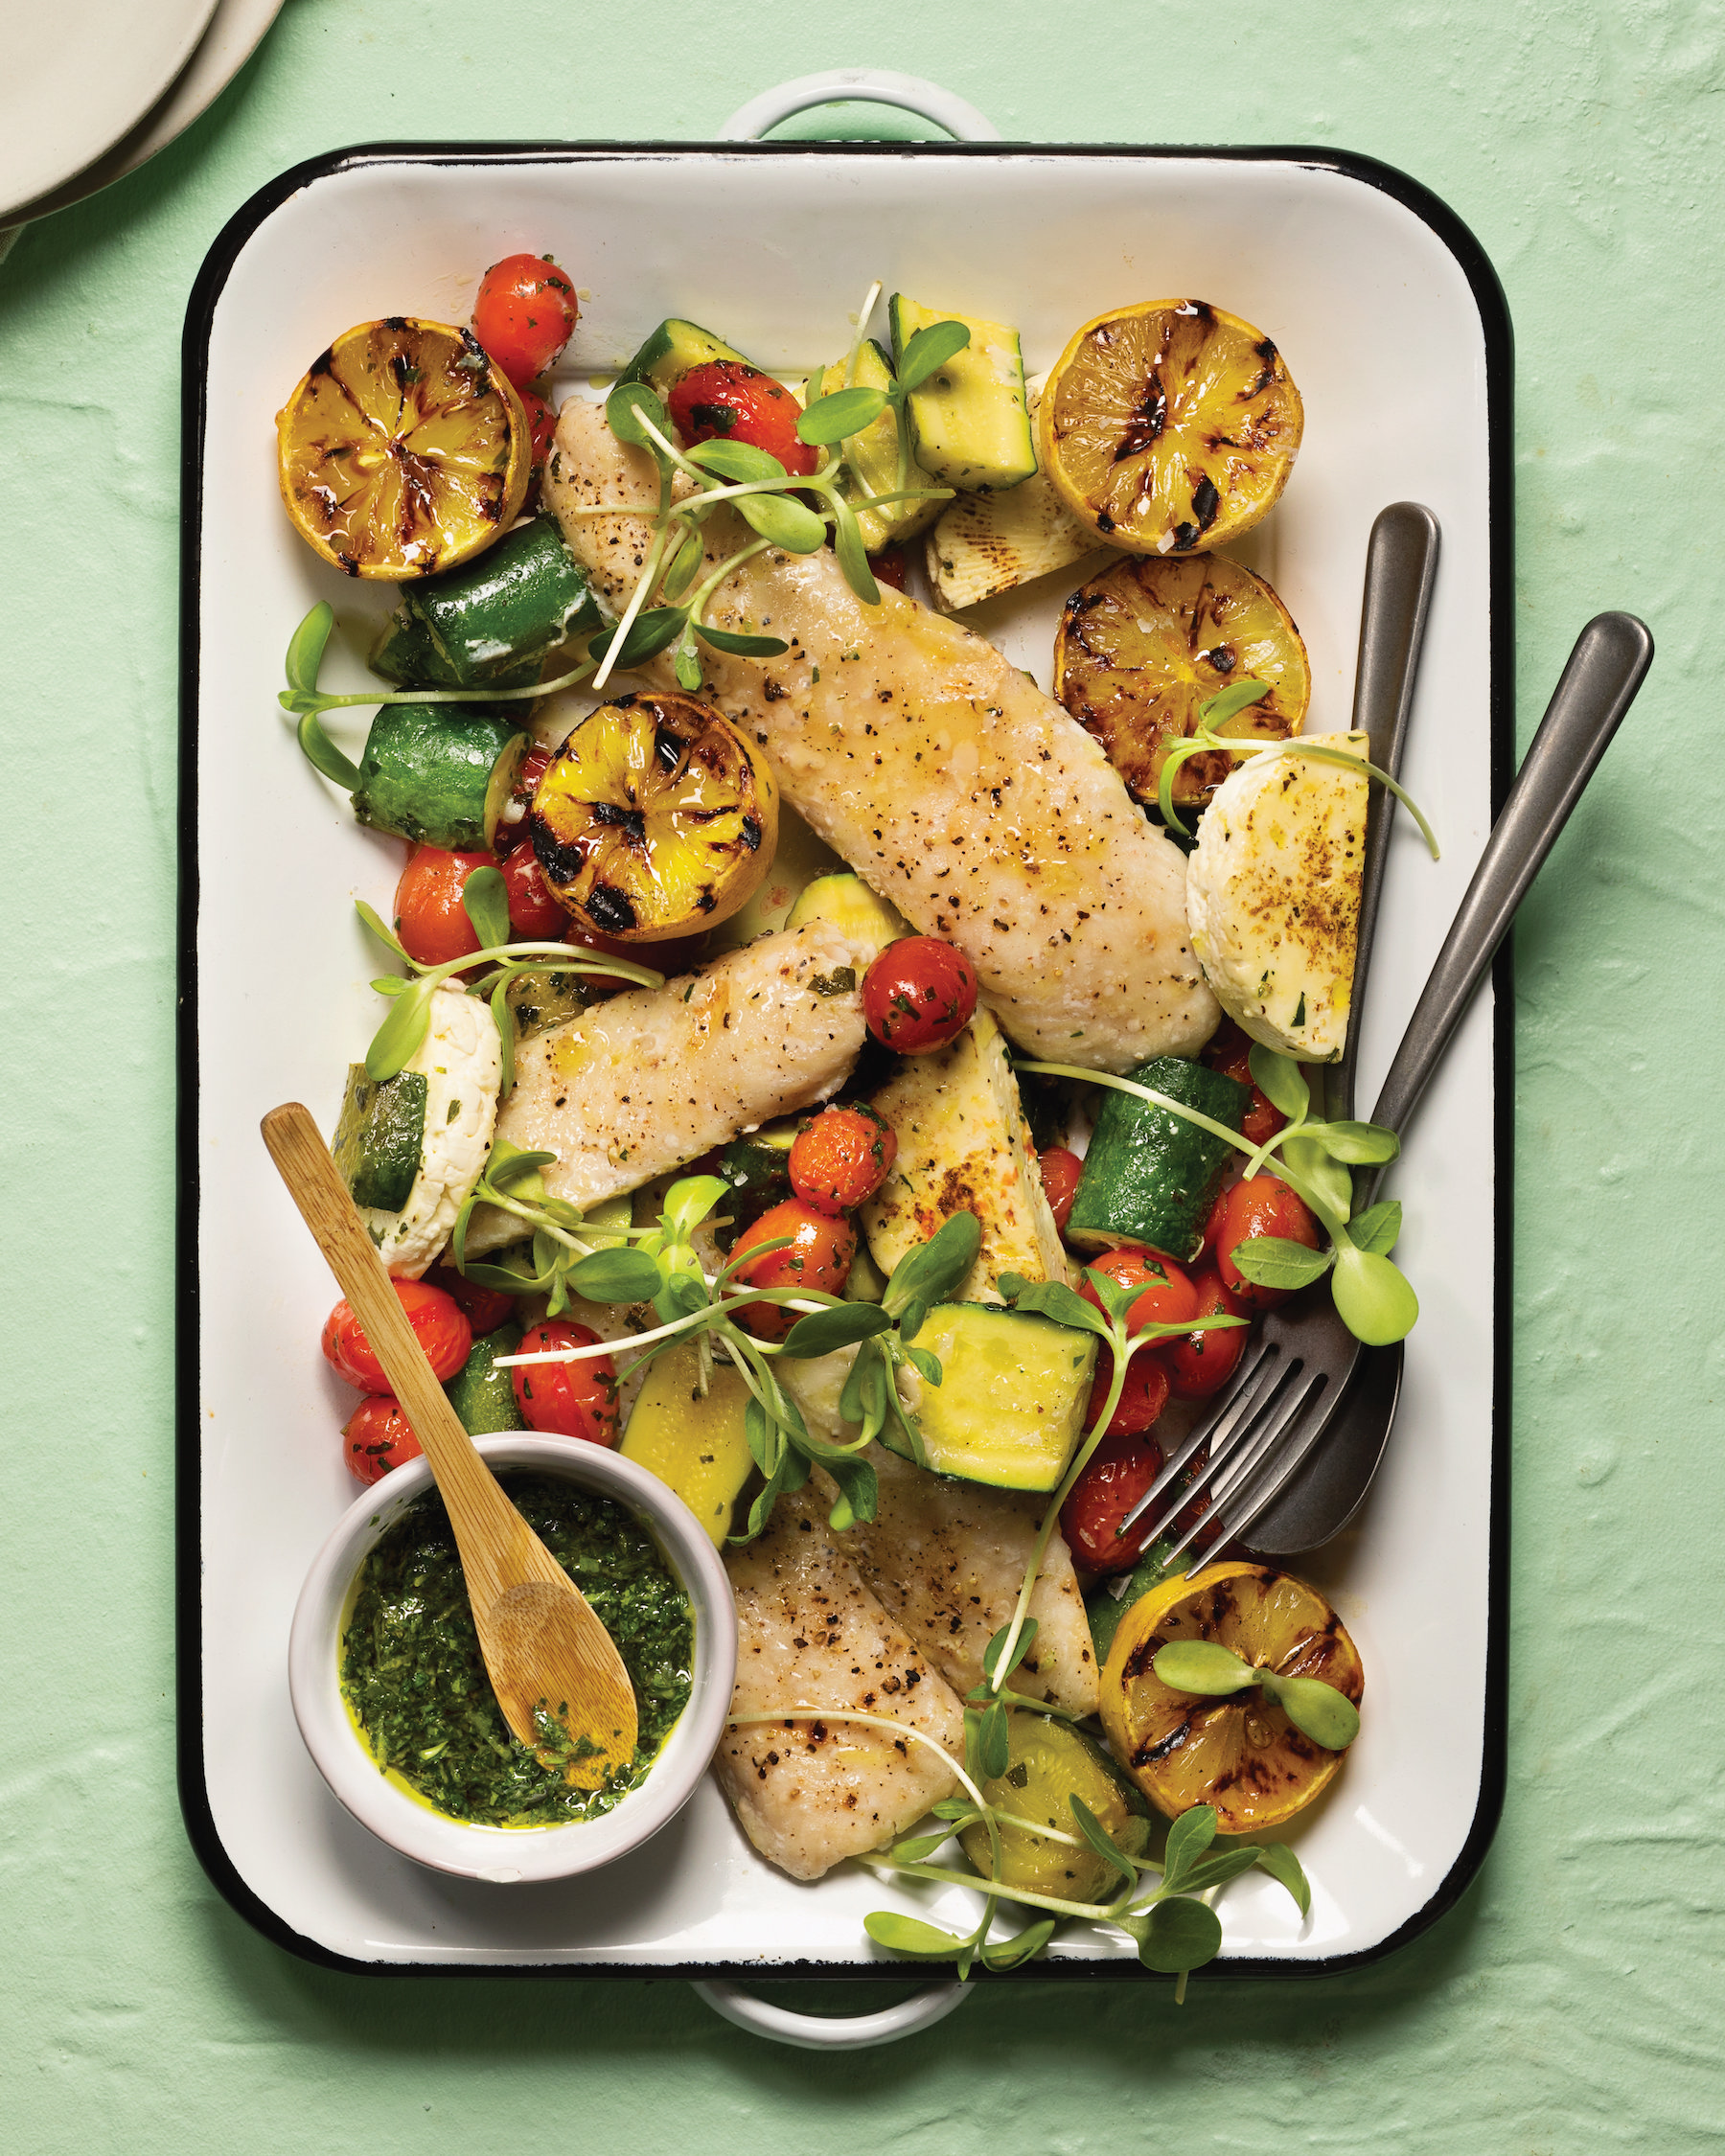 You are currently viewing Eat in colour with this baked fish and veggies